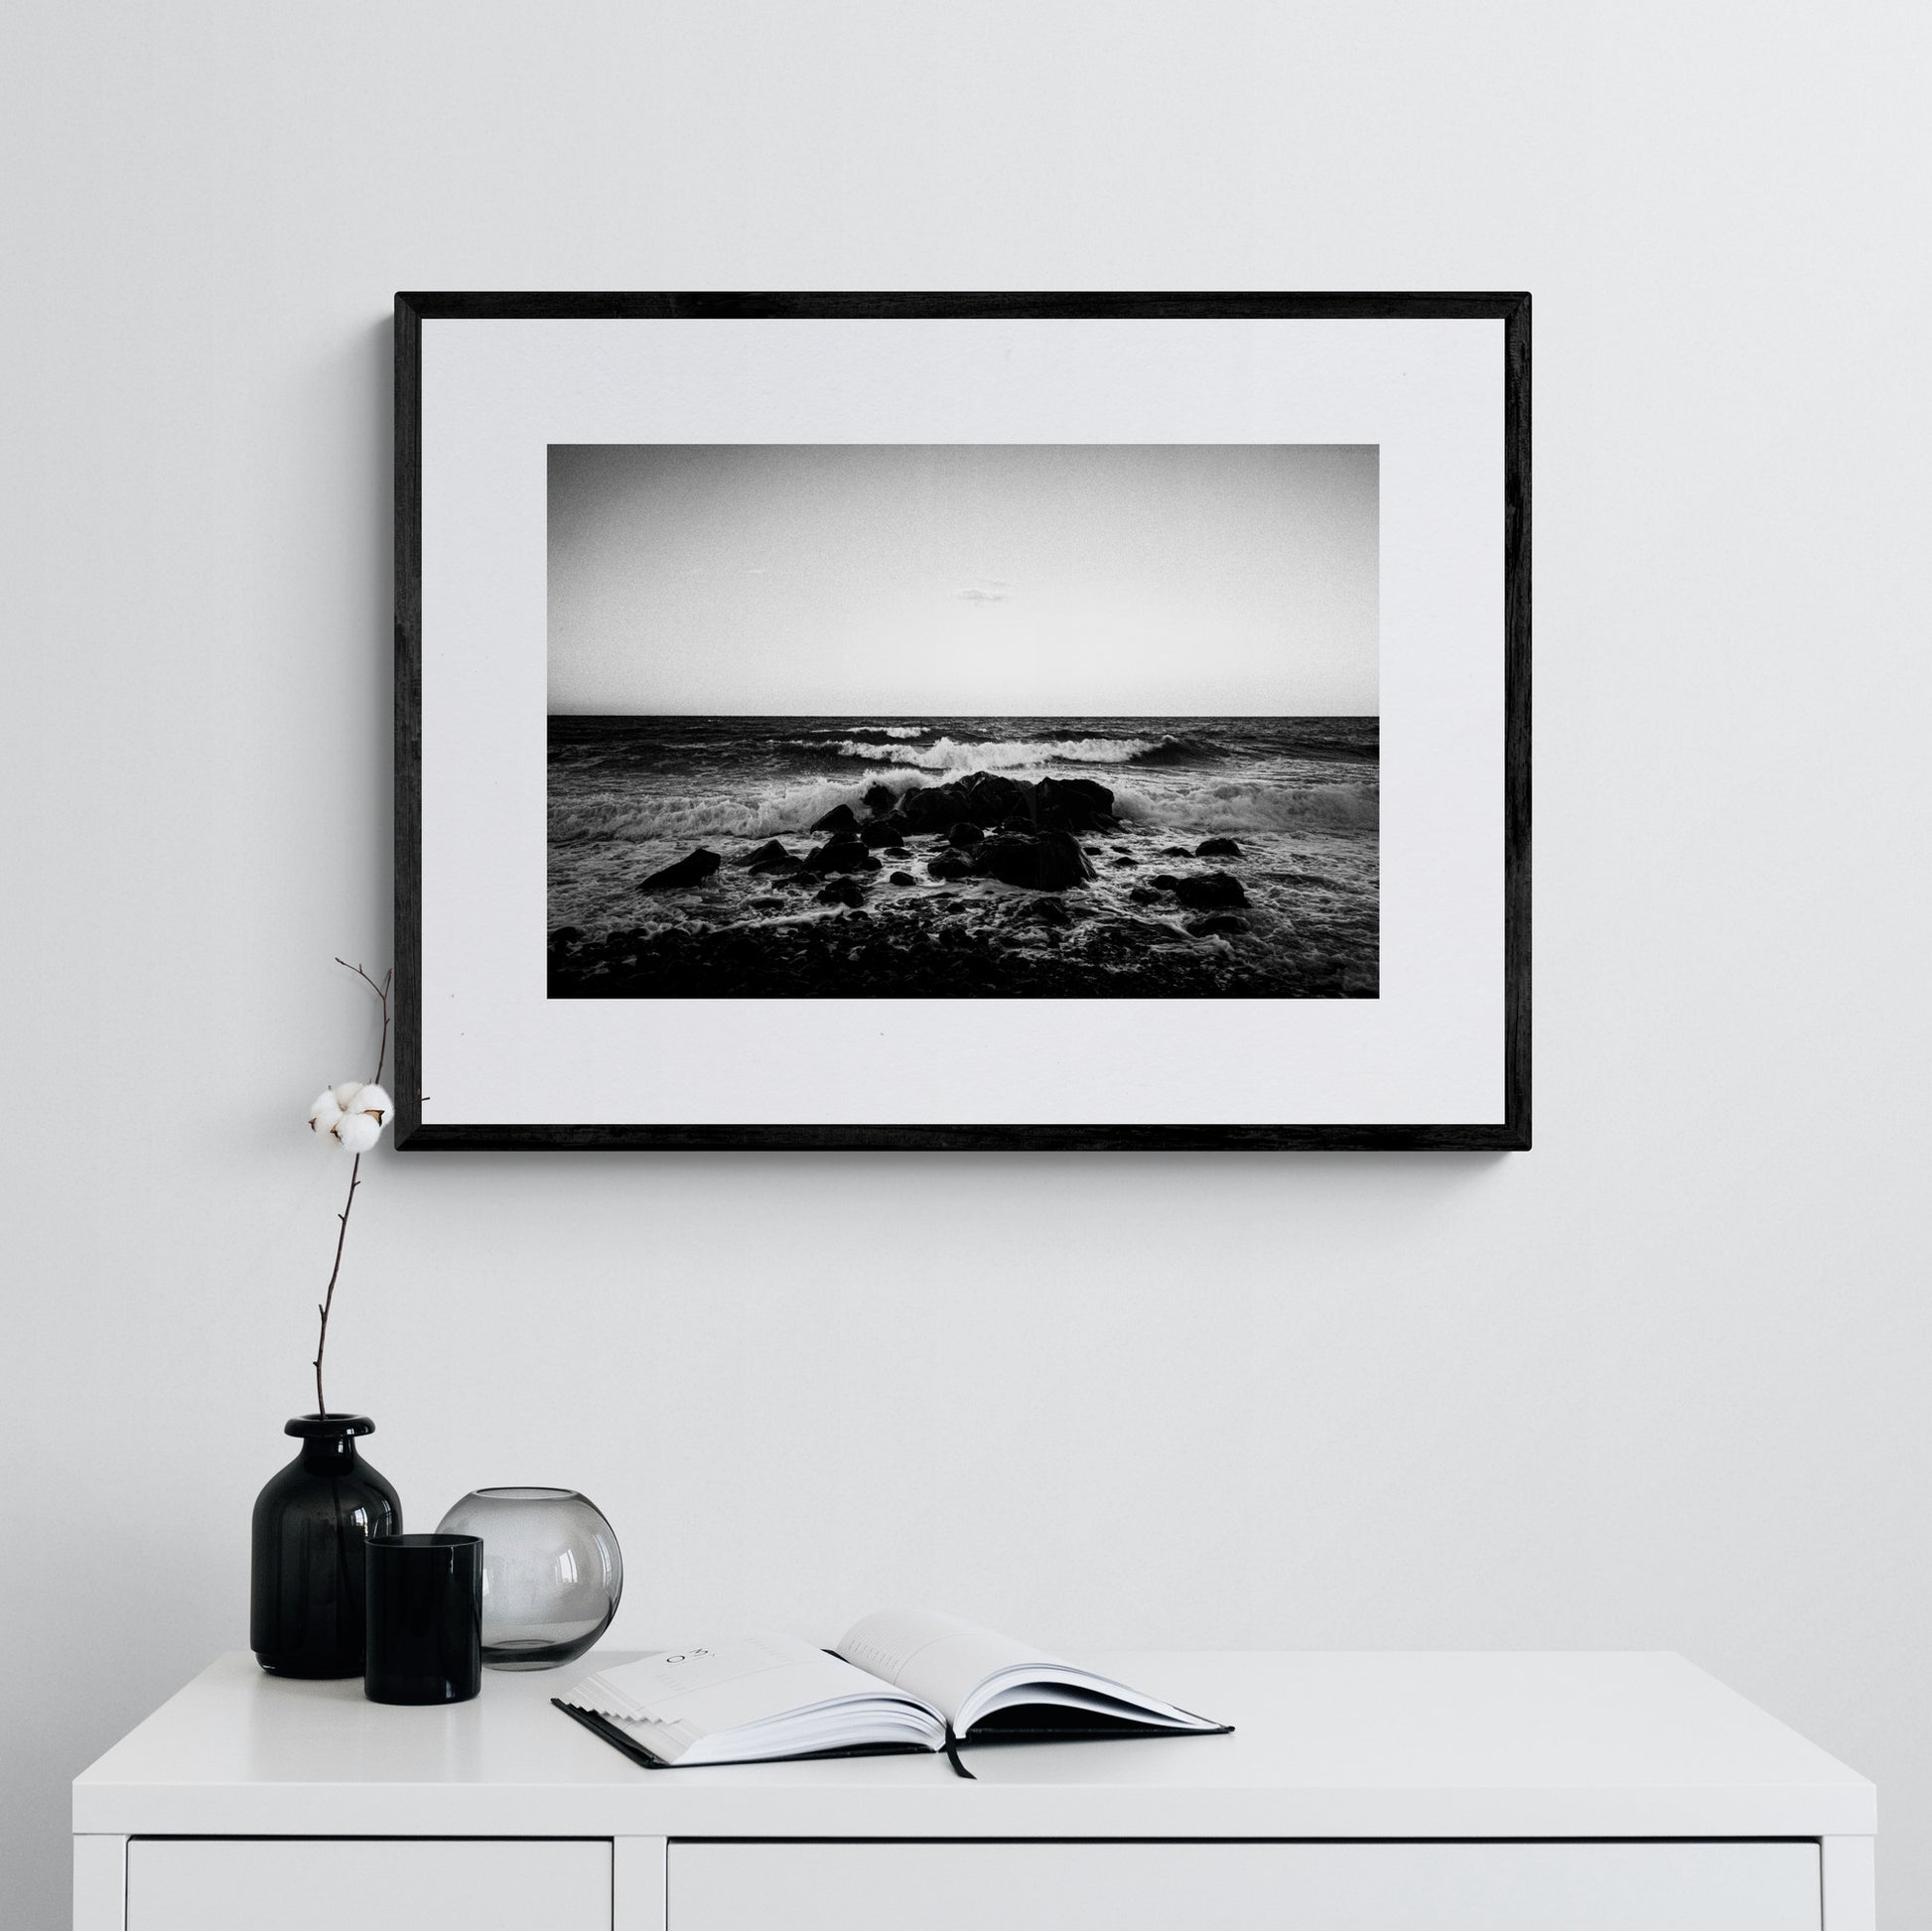 Santorini, Waves crushing on a boulder | Chorōs | Black-and-white wall art photography from Greece - single framed photo